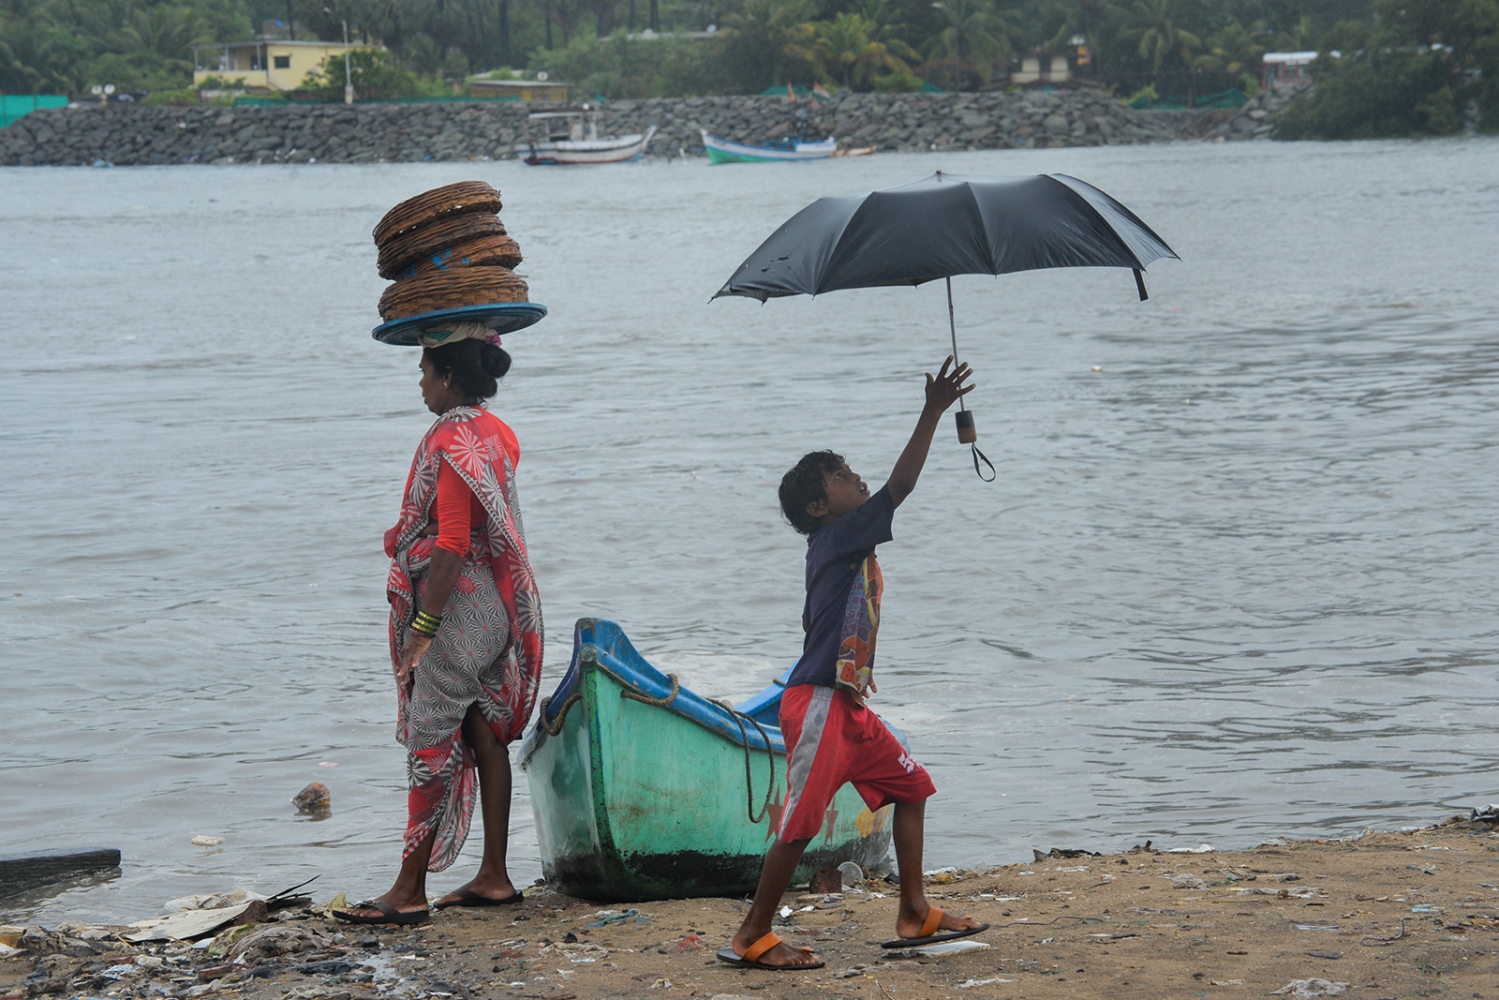 Development over community: perspective from a Mumbai fishing village 